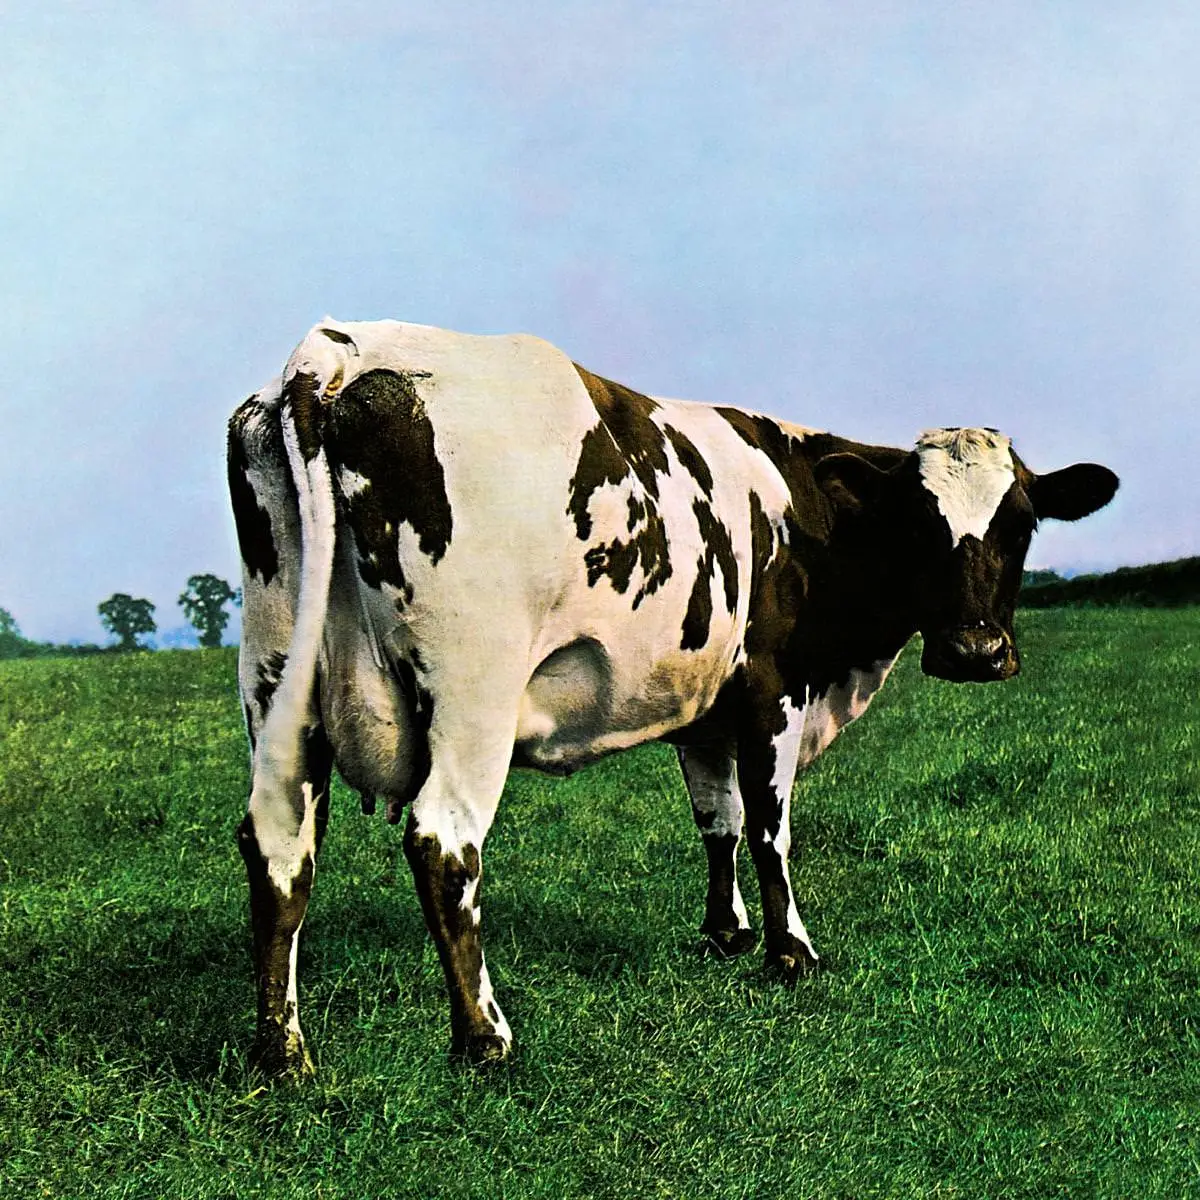 pink floyd atom heart mother goes on the road